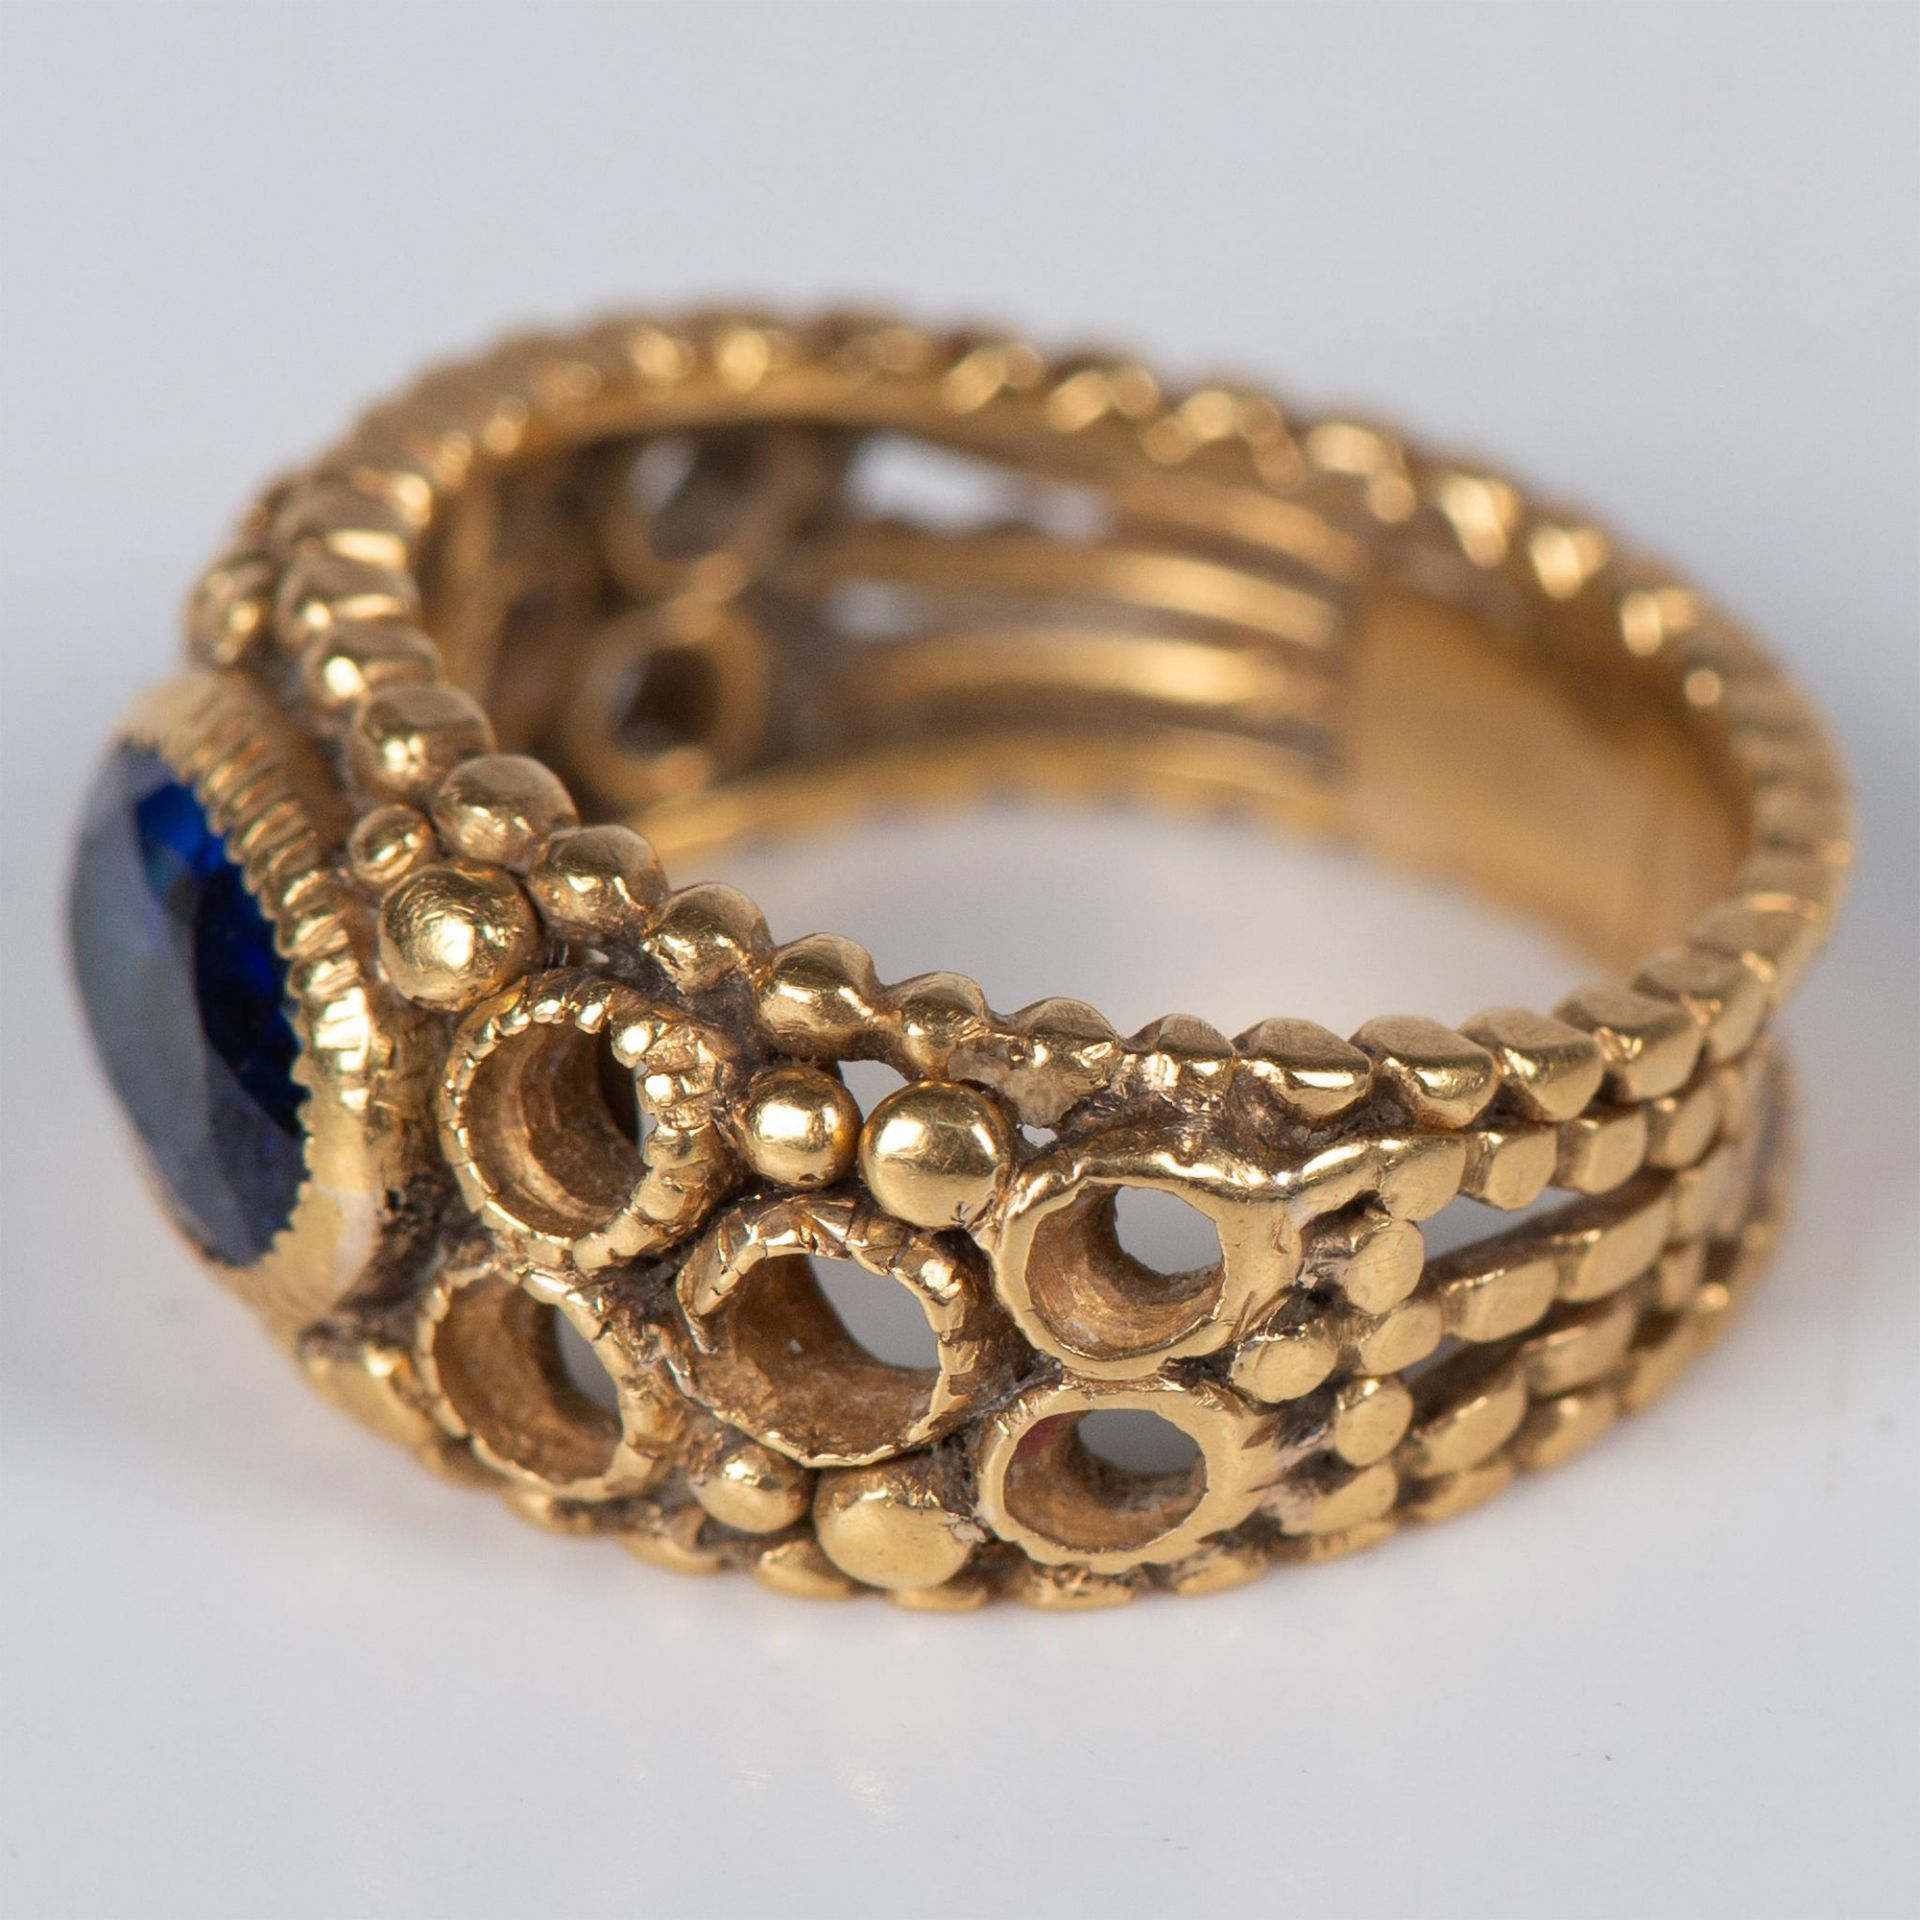 Antique 19th c. 20K Gold and Natural Sapphire Ring - Image 2 of 5